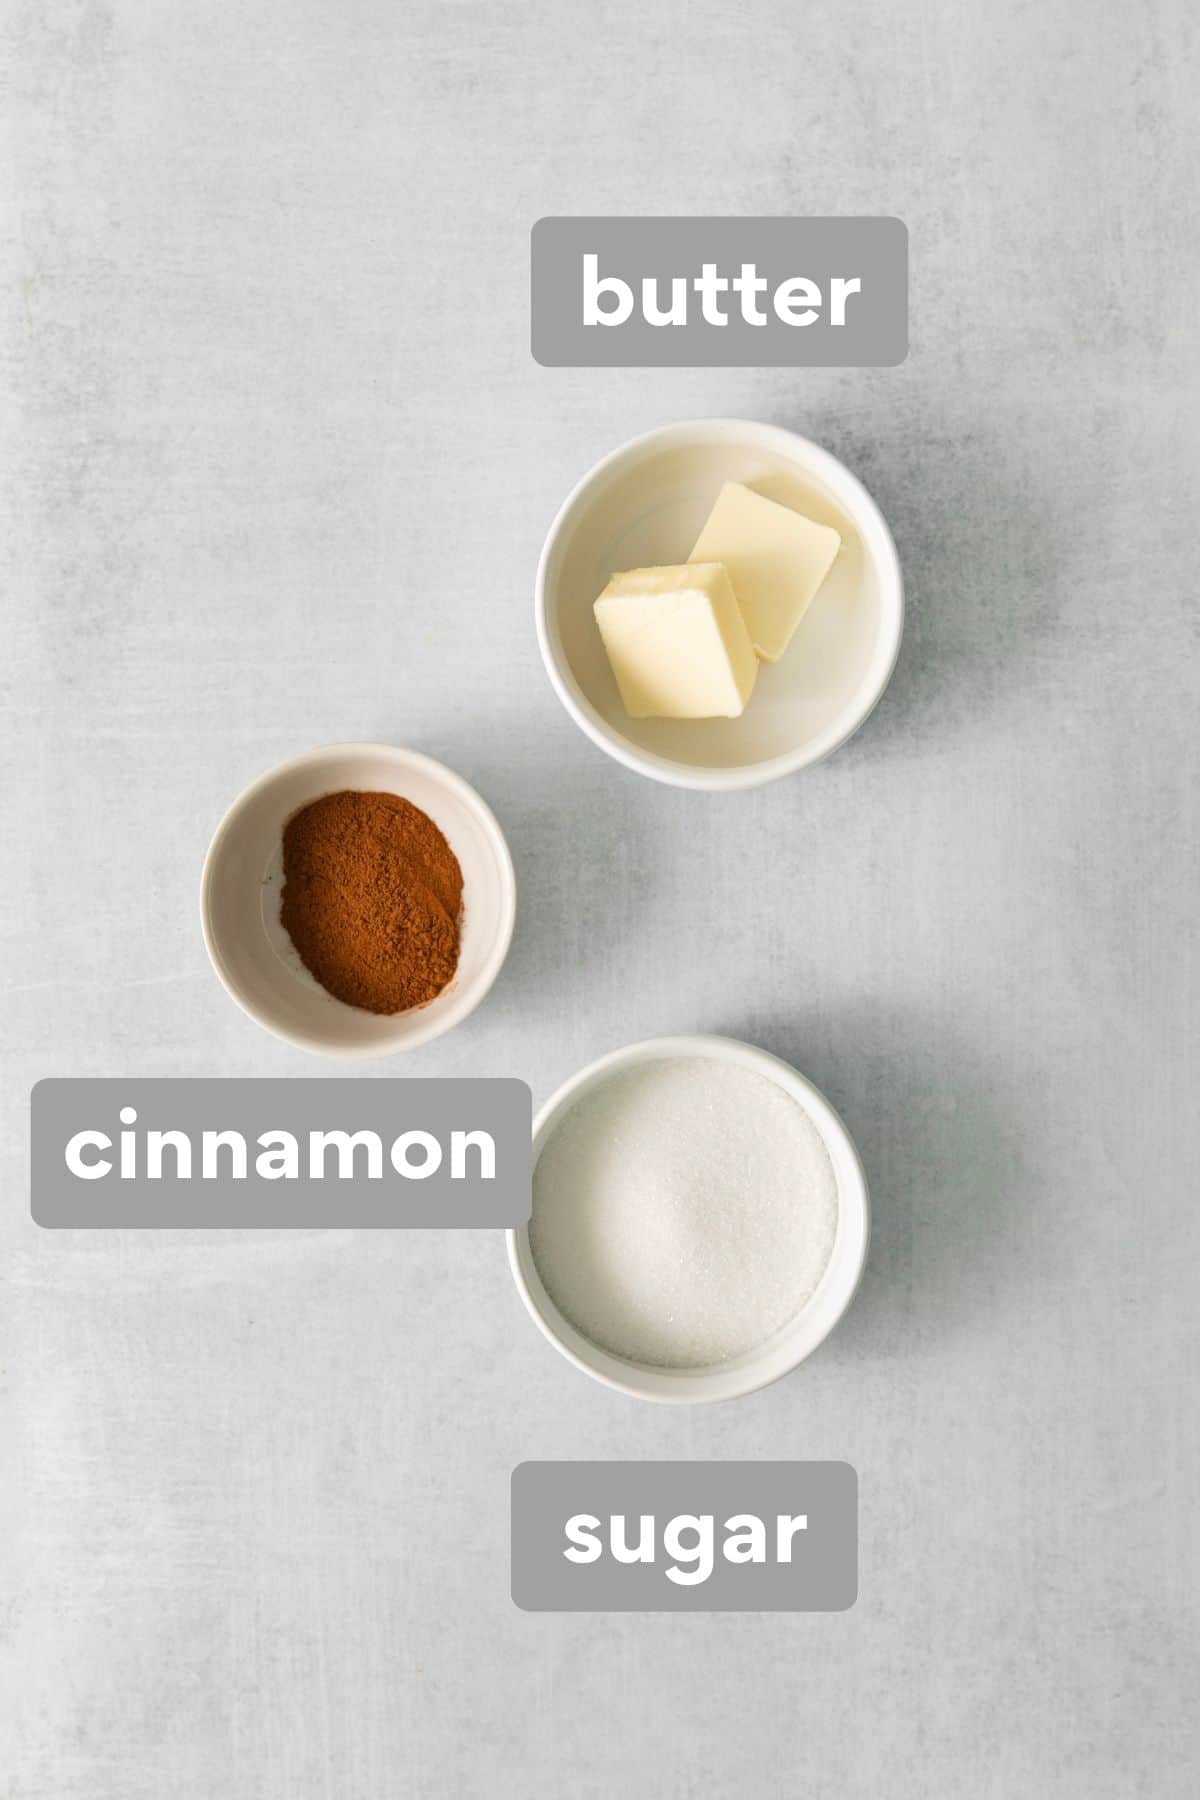 Gluten-free cinnamon stick topping ingredients on a countertop